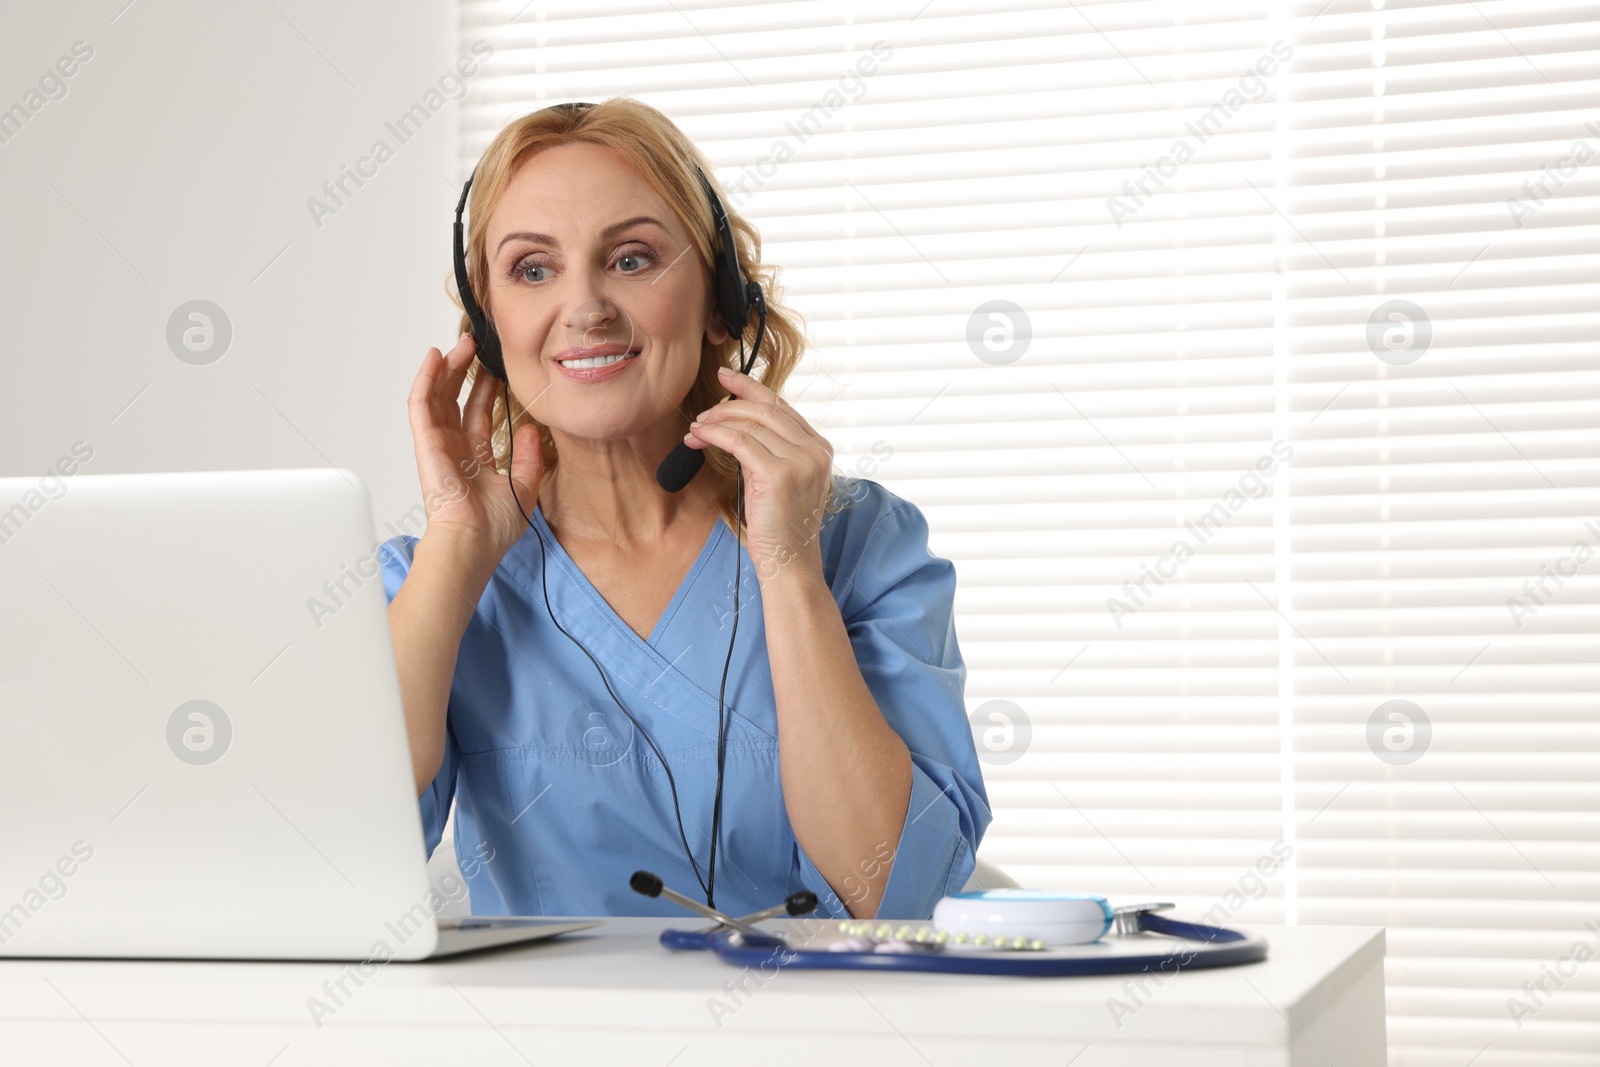 Photo of Doctor with laptop and headphones consulting patient in clinic. Online medicine concept